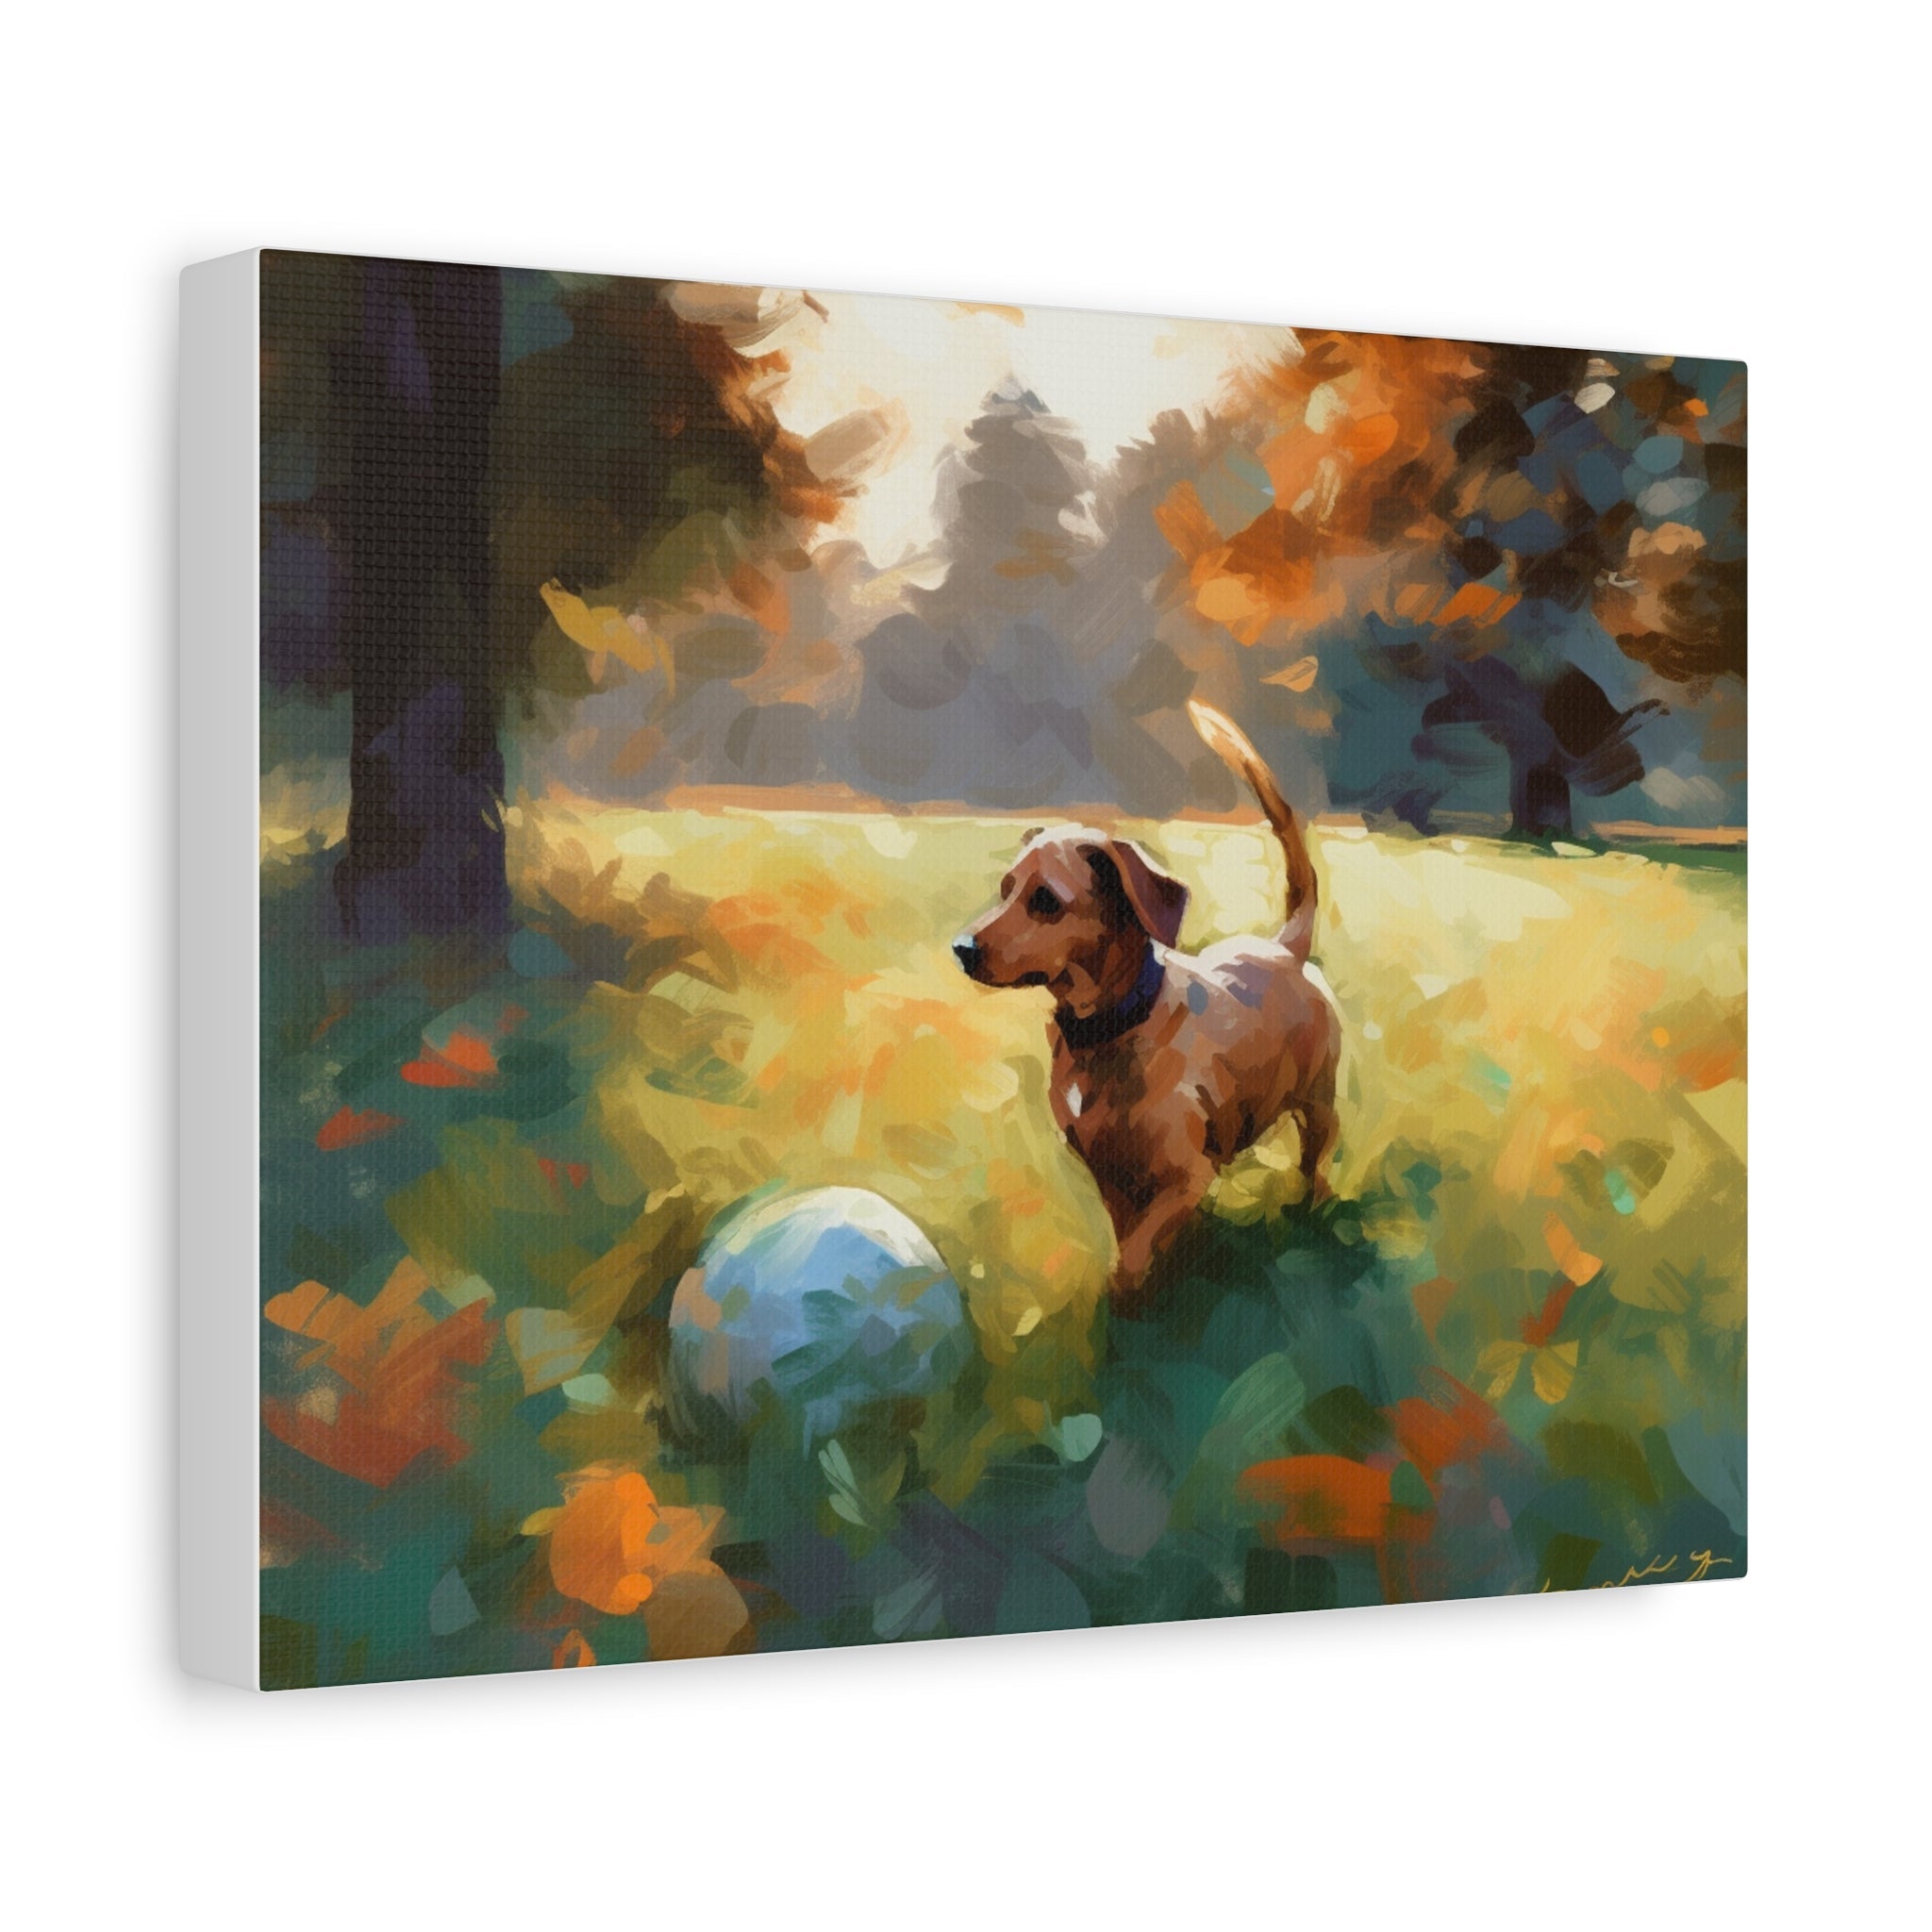 Dachshund Wall Decor: How to Spruce Up Your Space with Adorable Wiener Dog Art